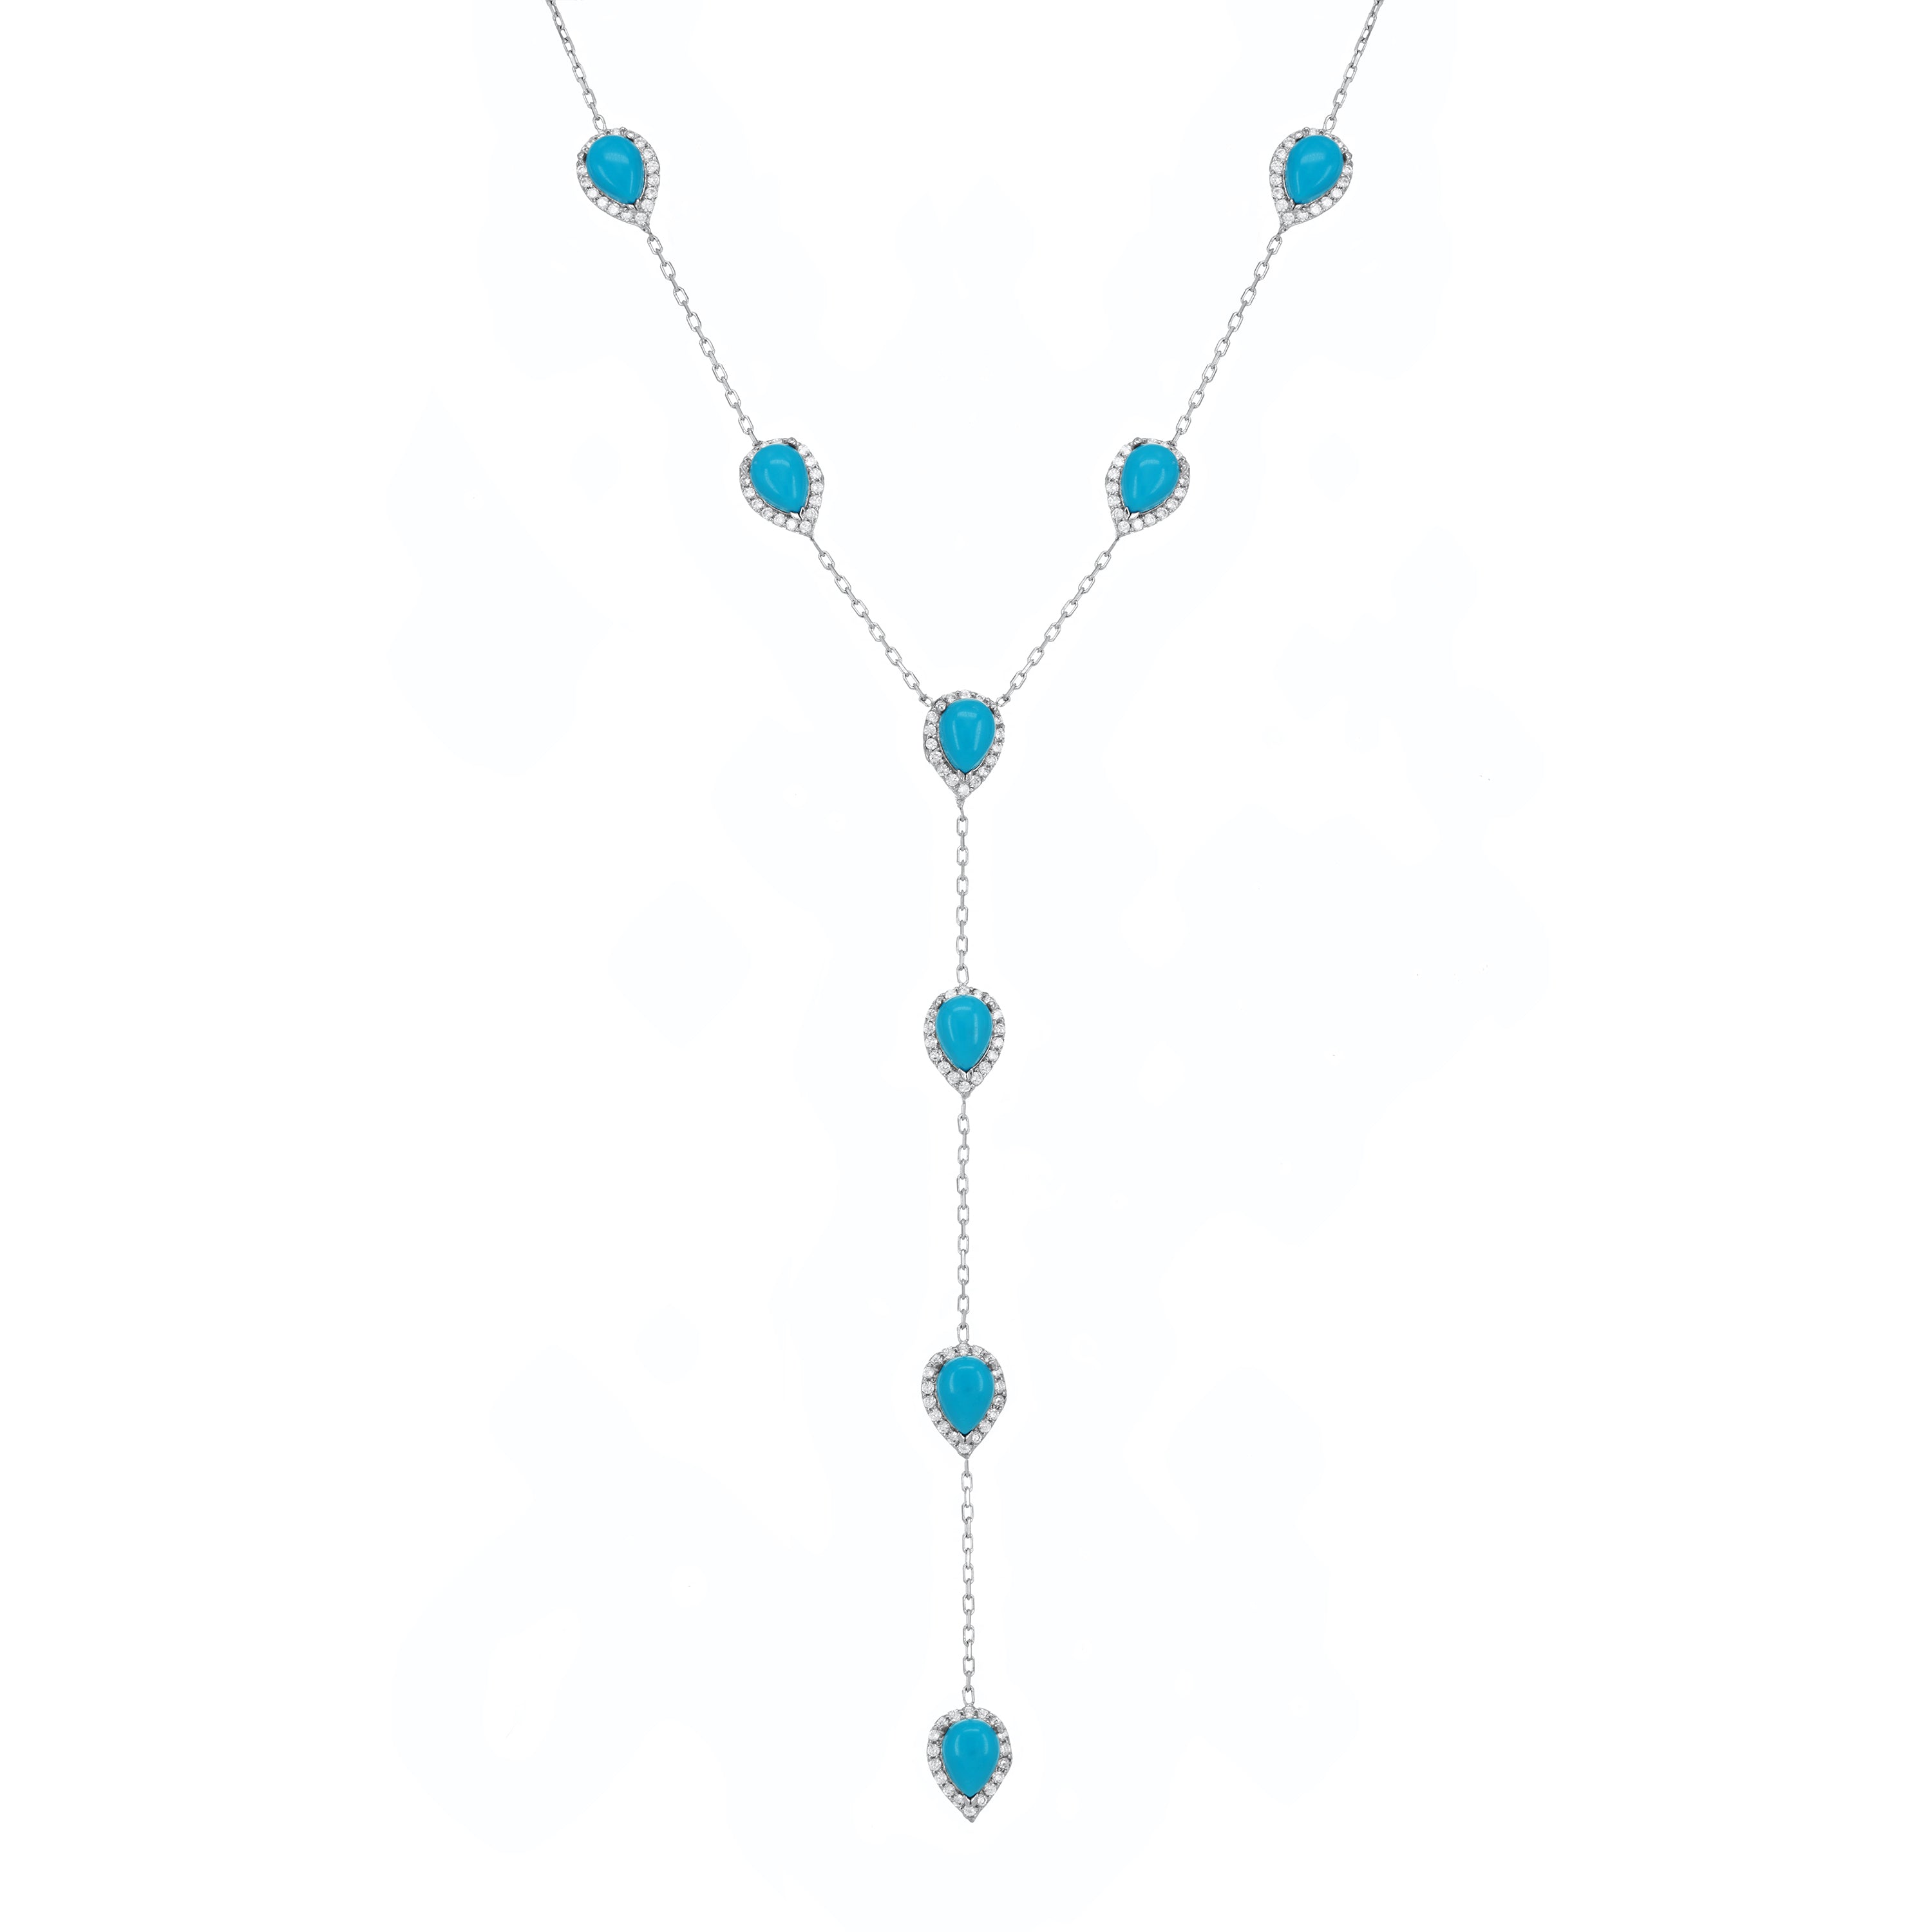 Reversed Turquoise Teardrop Lariat Chain Necklace